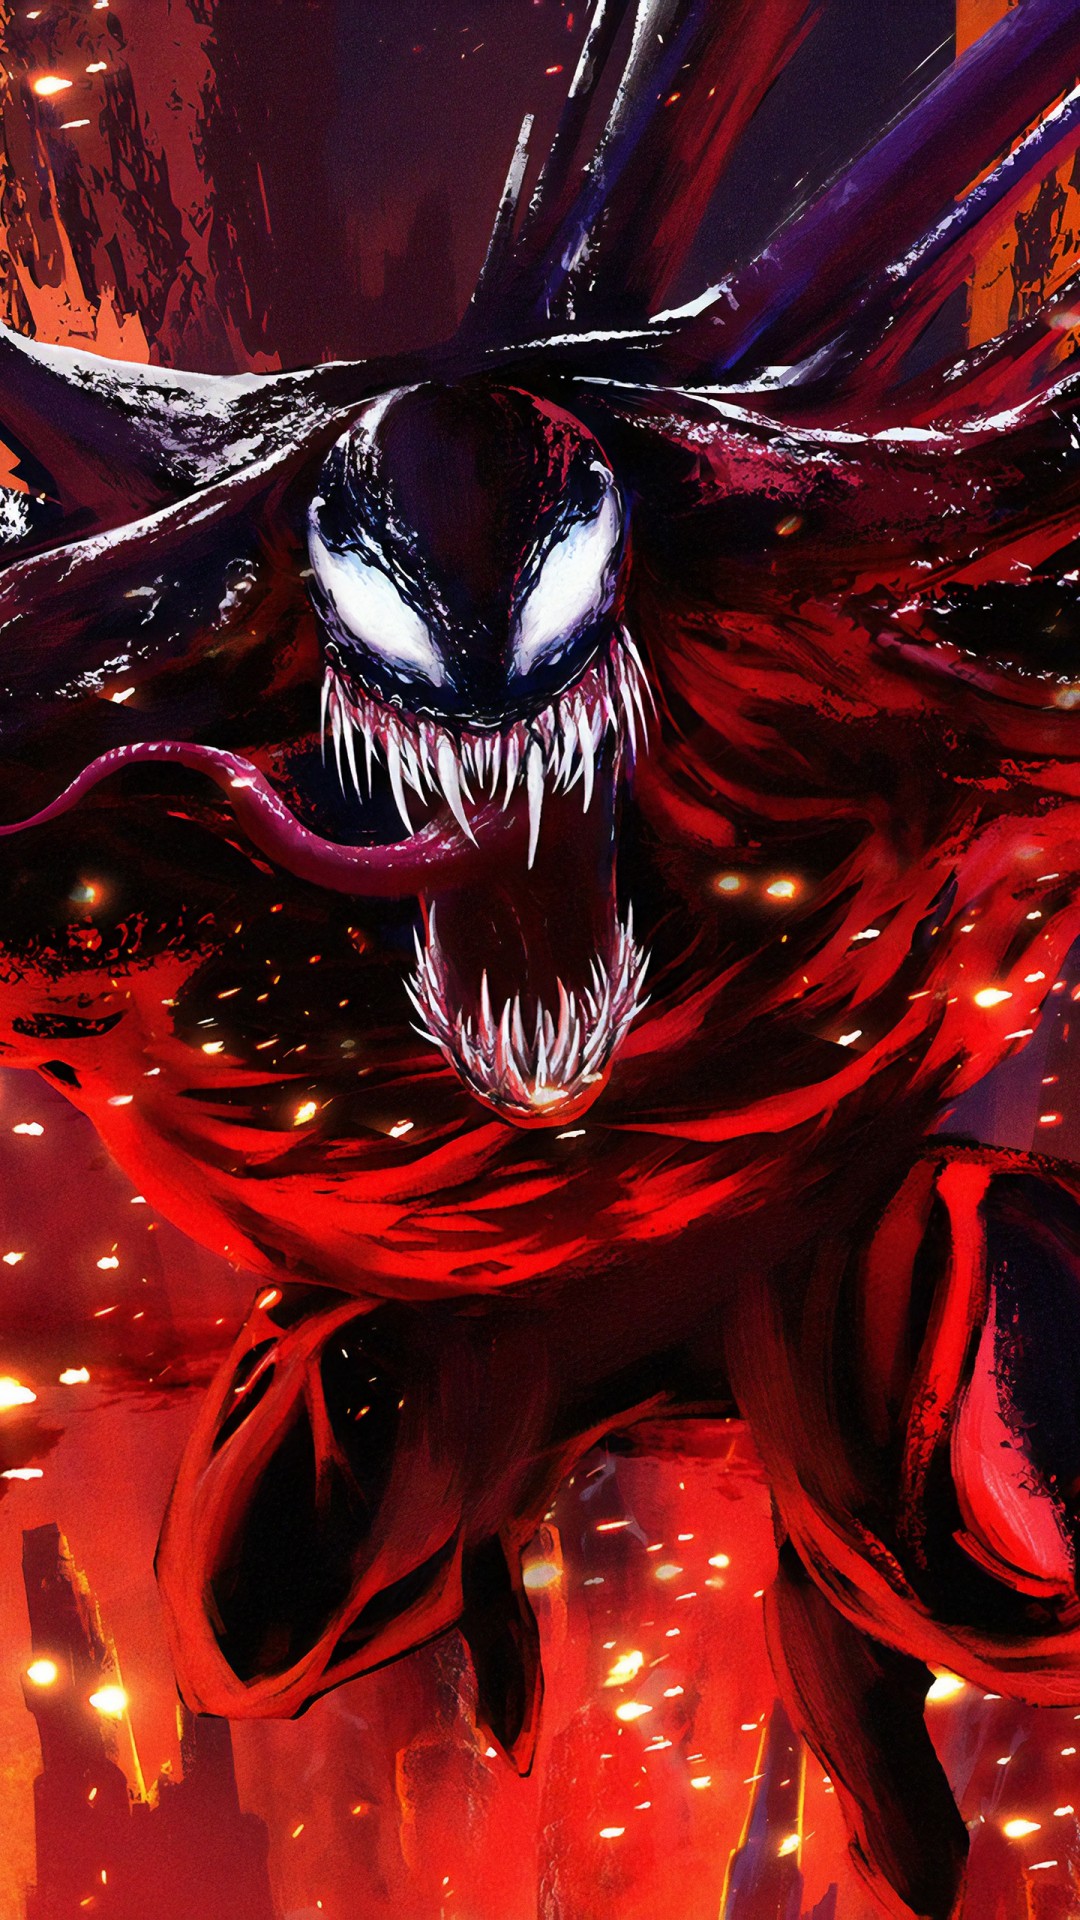 Venom And Carnage Mixed Together - HD Wallpaper 